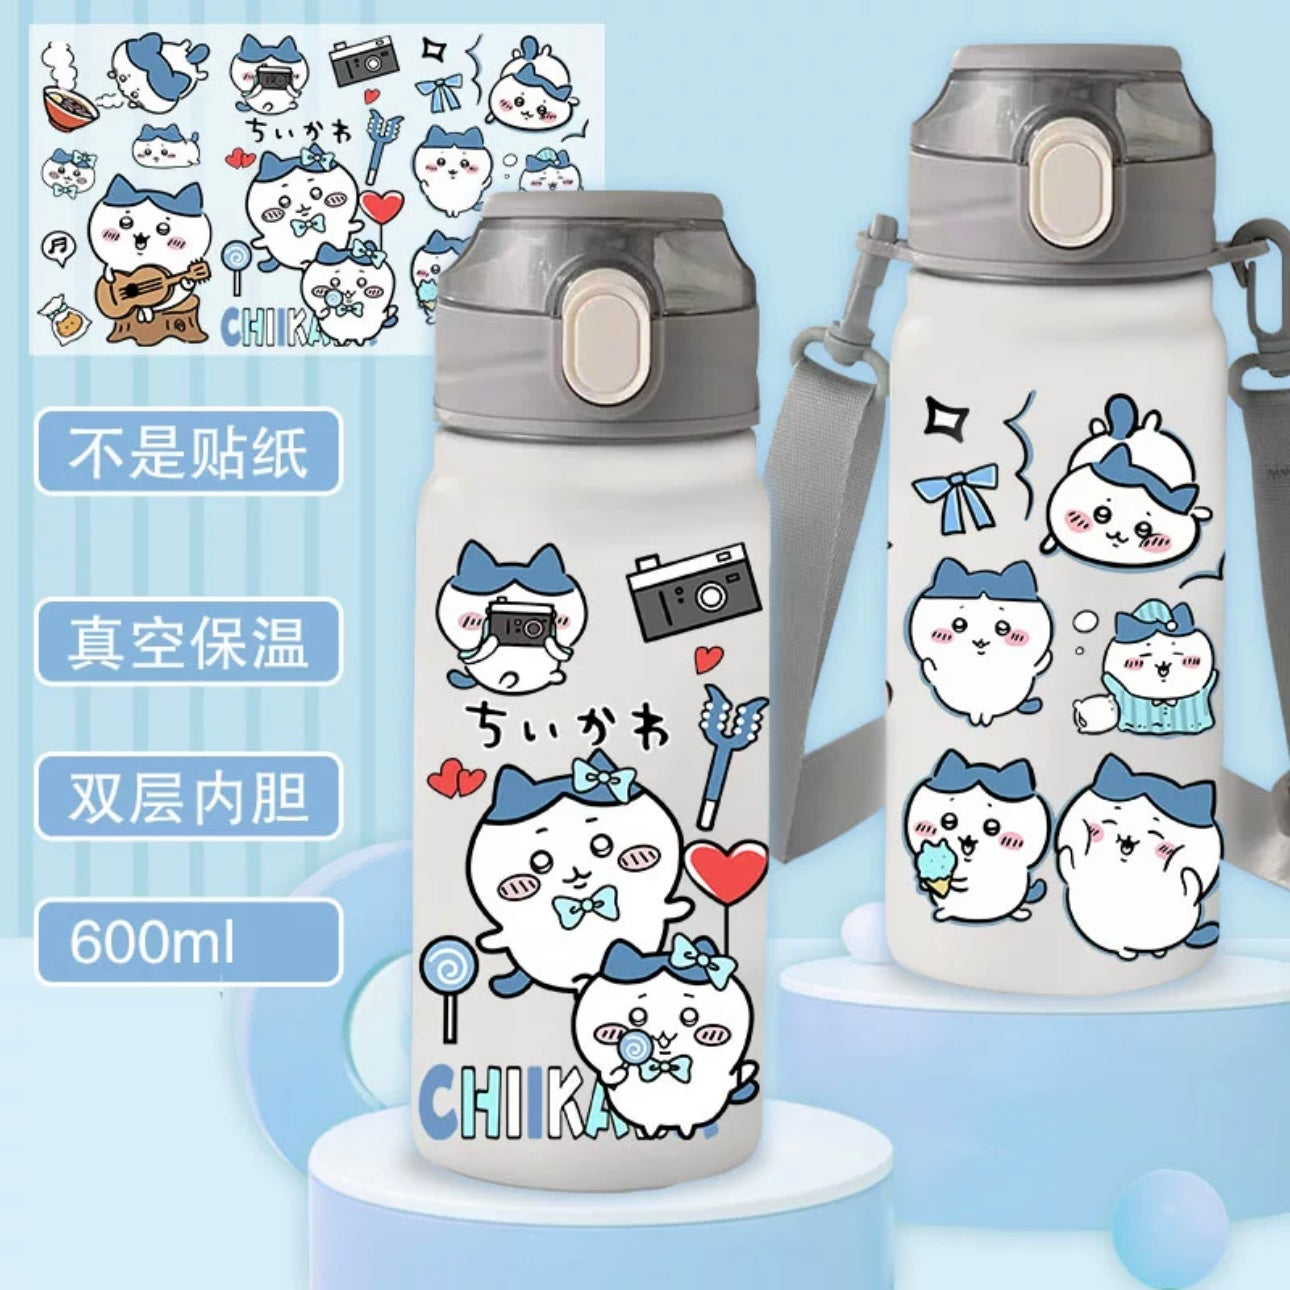 Japanese Cartoon ChiiKawa Tumbler | Hachiware Shoulder Water Bottle with Straw and Strap - 316 Stainless Steel Lovely Cup